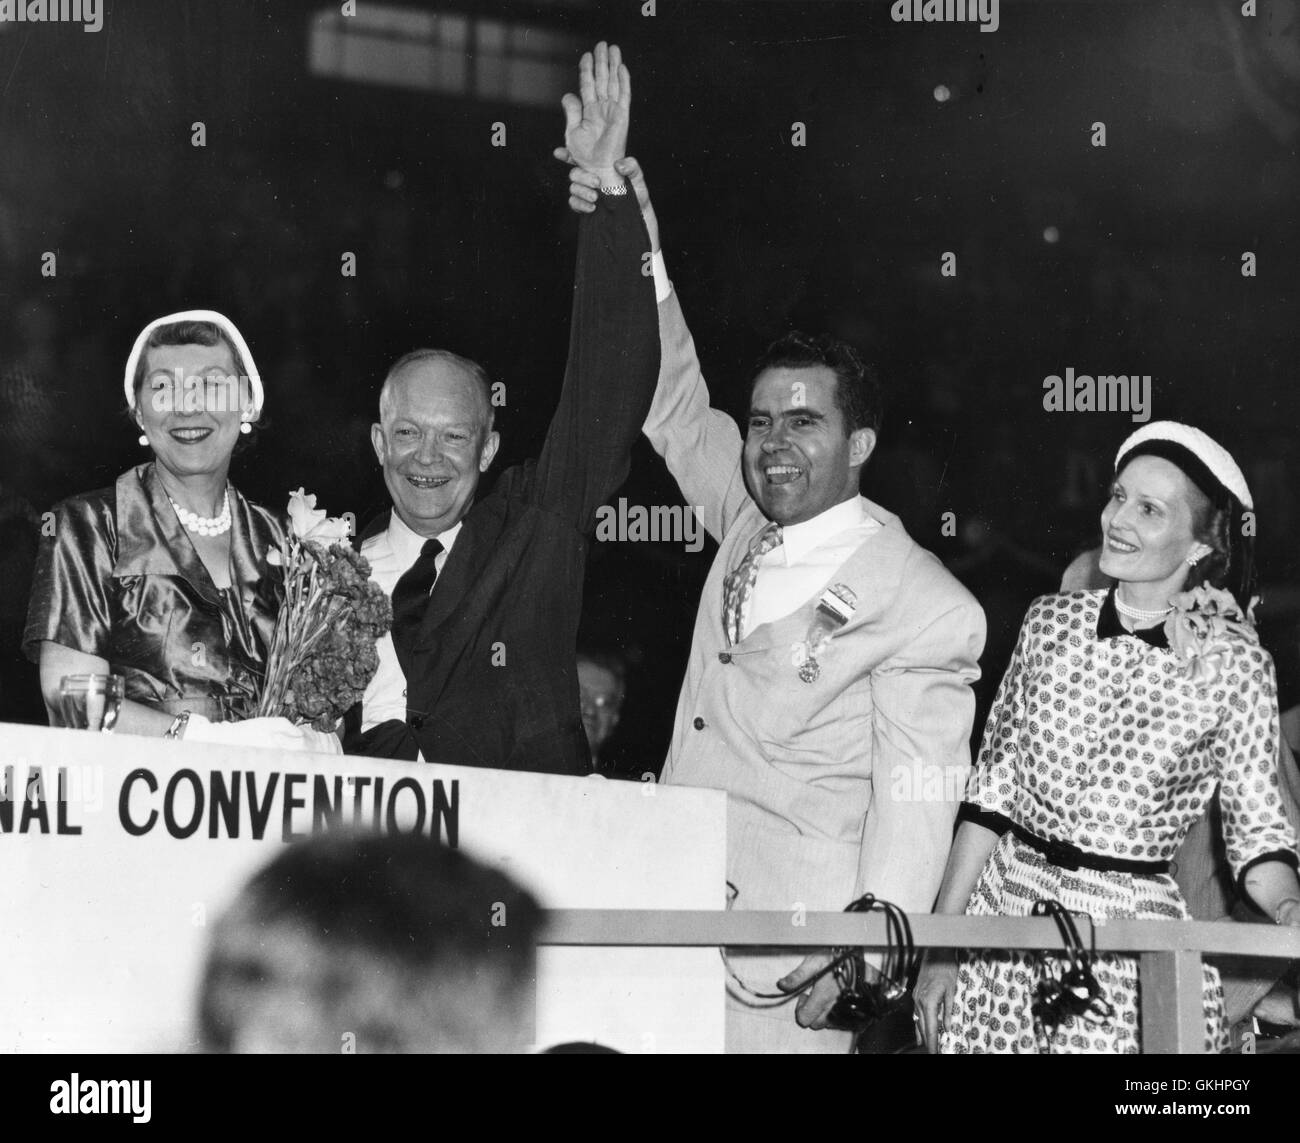 Republican nominee Gen. Dwight Eisenhower's arm is raised before delegates at concluding convention session in Chicago on July 11, by Ike's running mate on the GOP ticket, Richard M. Nixon of California. Stock Photo